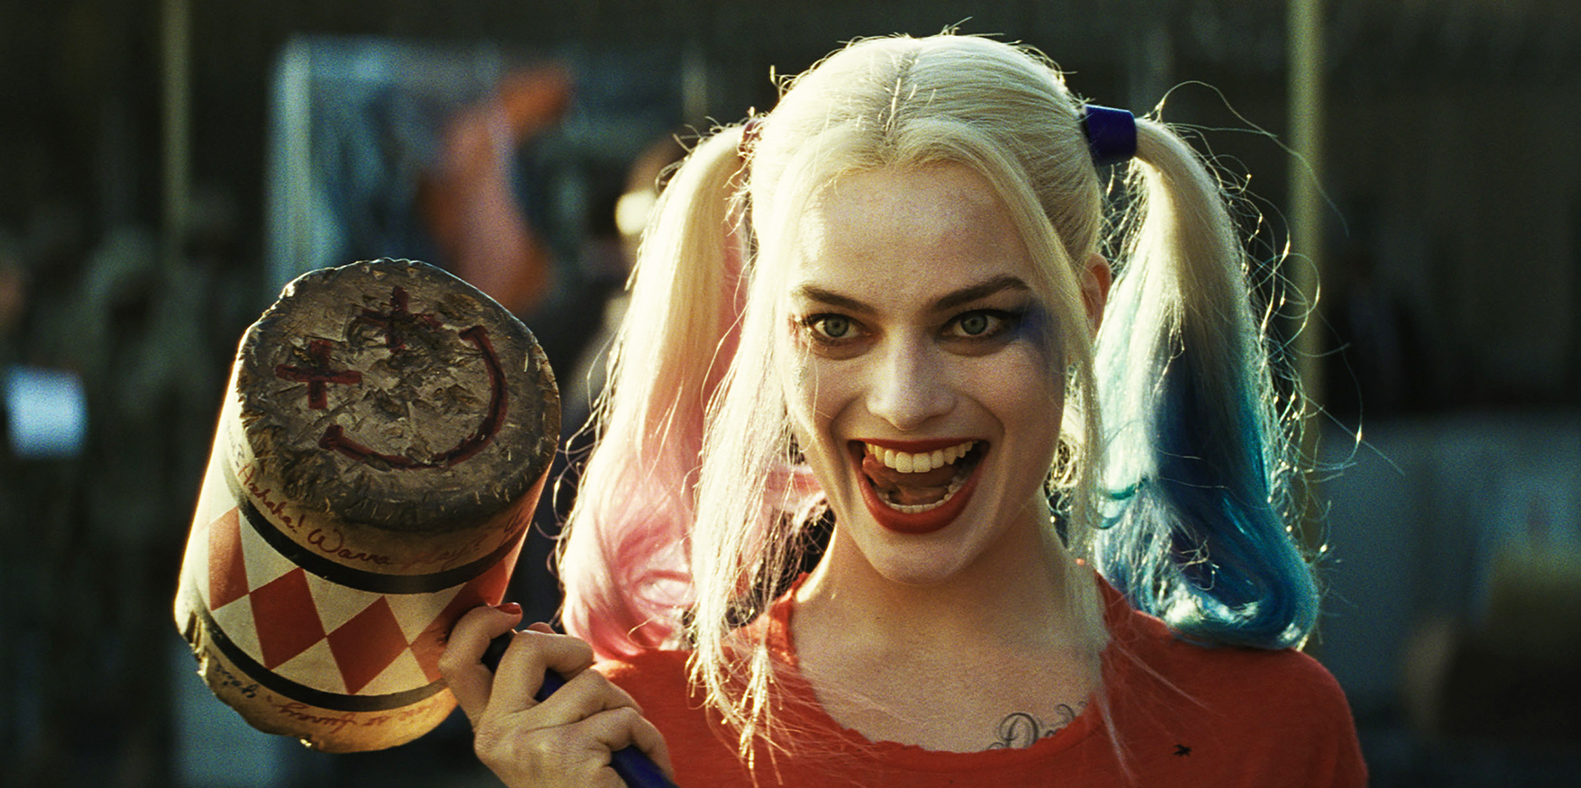 Who Plays Harley Quinn in Suicide Squad